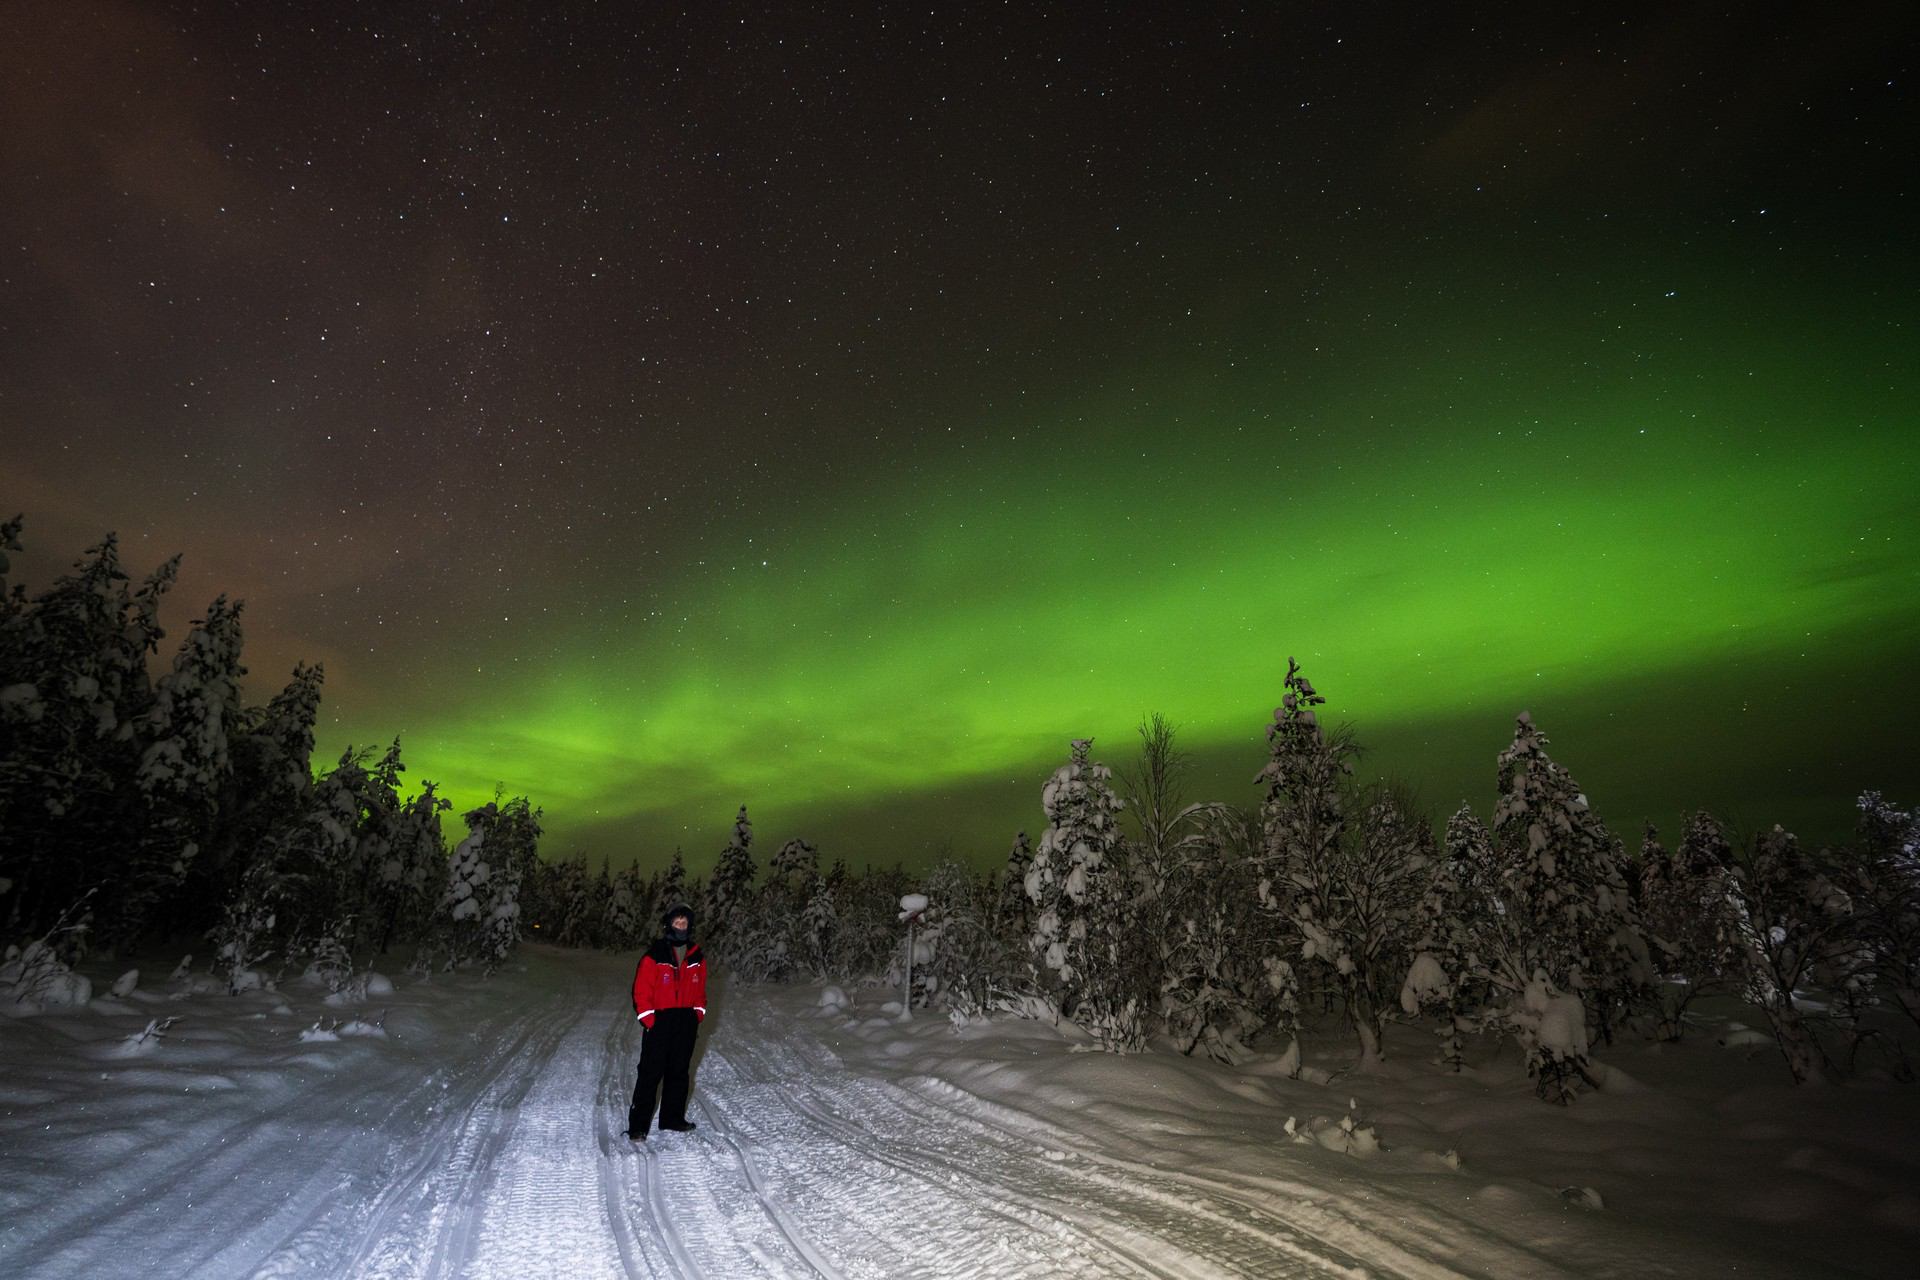 David Simpson and the northern lights in Rovaniemi, Finland. Christmas Day in Lapland